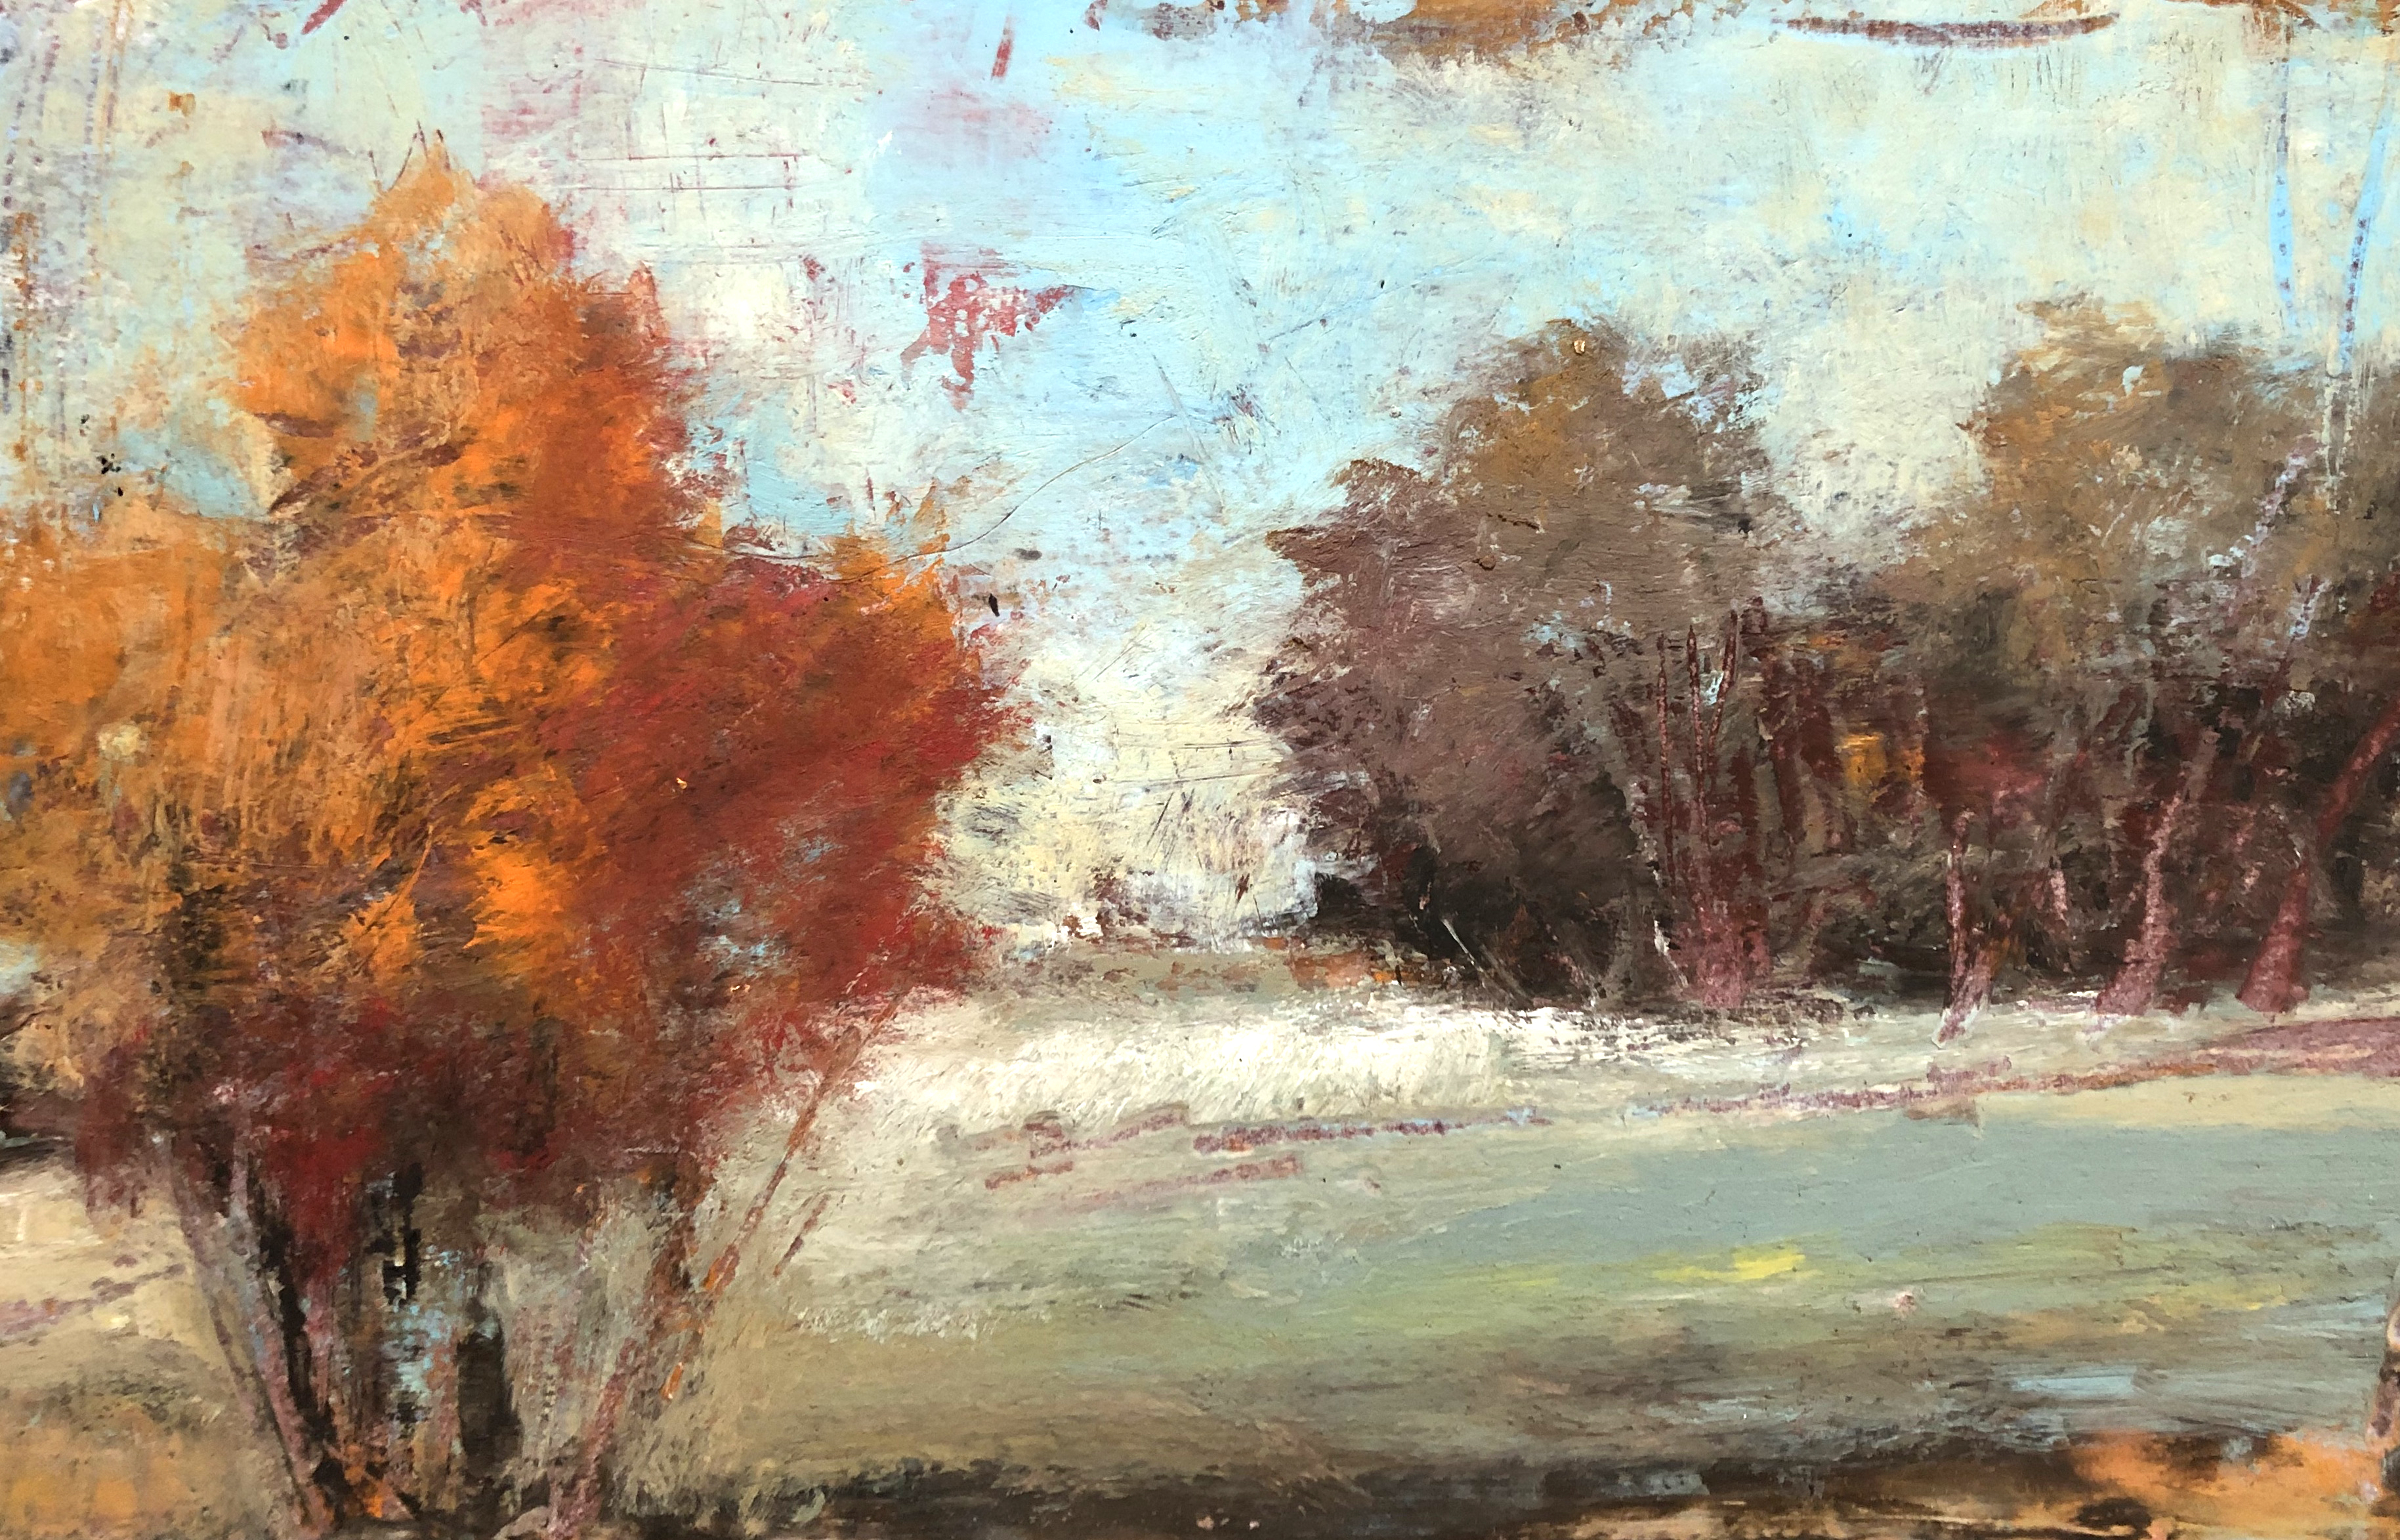 &quot;Autumn Sketch&quot; by 5 x 7&quot; oil and cold wax medium on Arches Paper,  Rachael McCampbell © 2019